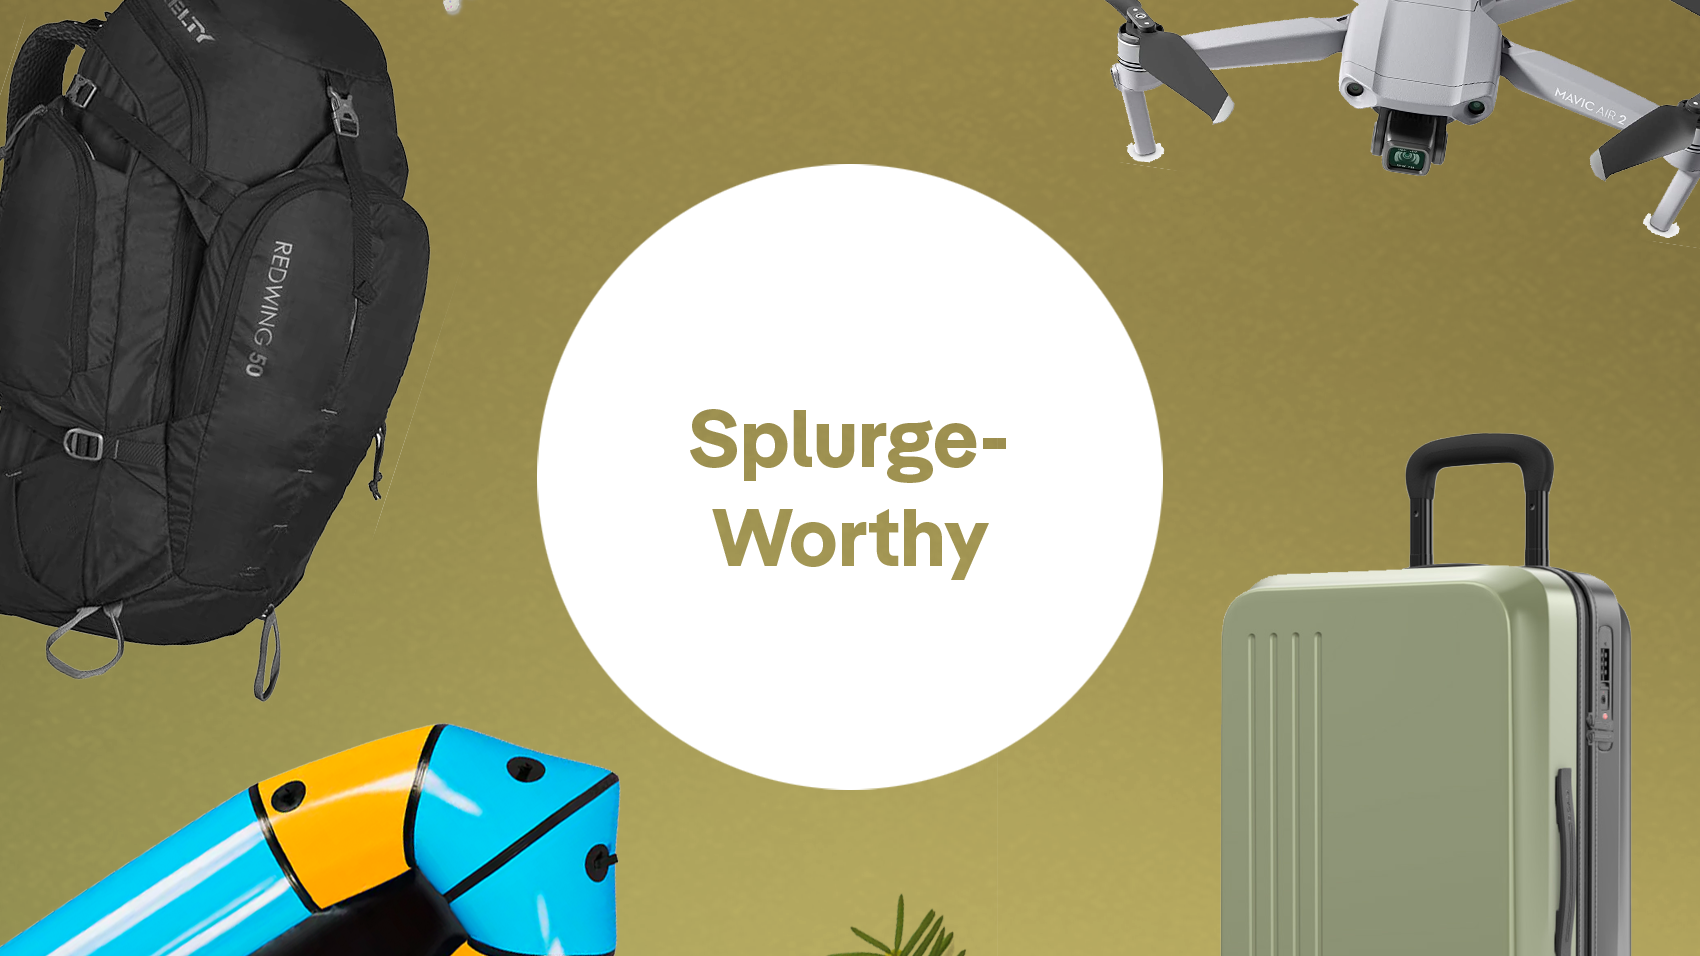 An army-green background with a white circle in the center. In the circle are the words Splurge-worthy, also in army green. Surrounding the white circle are images of a backpack, raft, rolling luggage and a drone